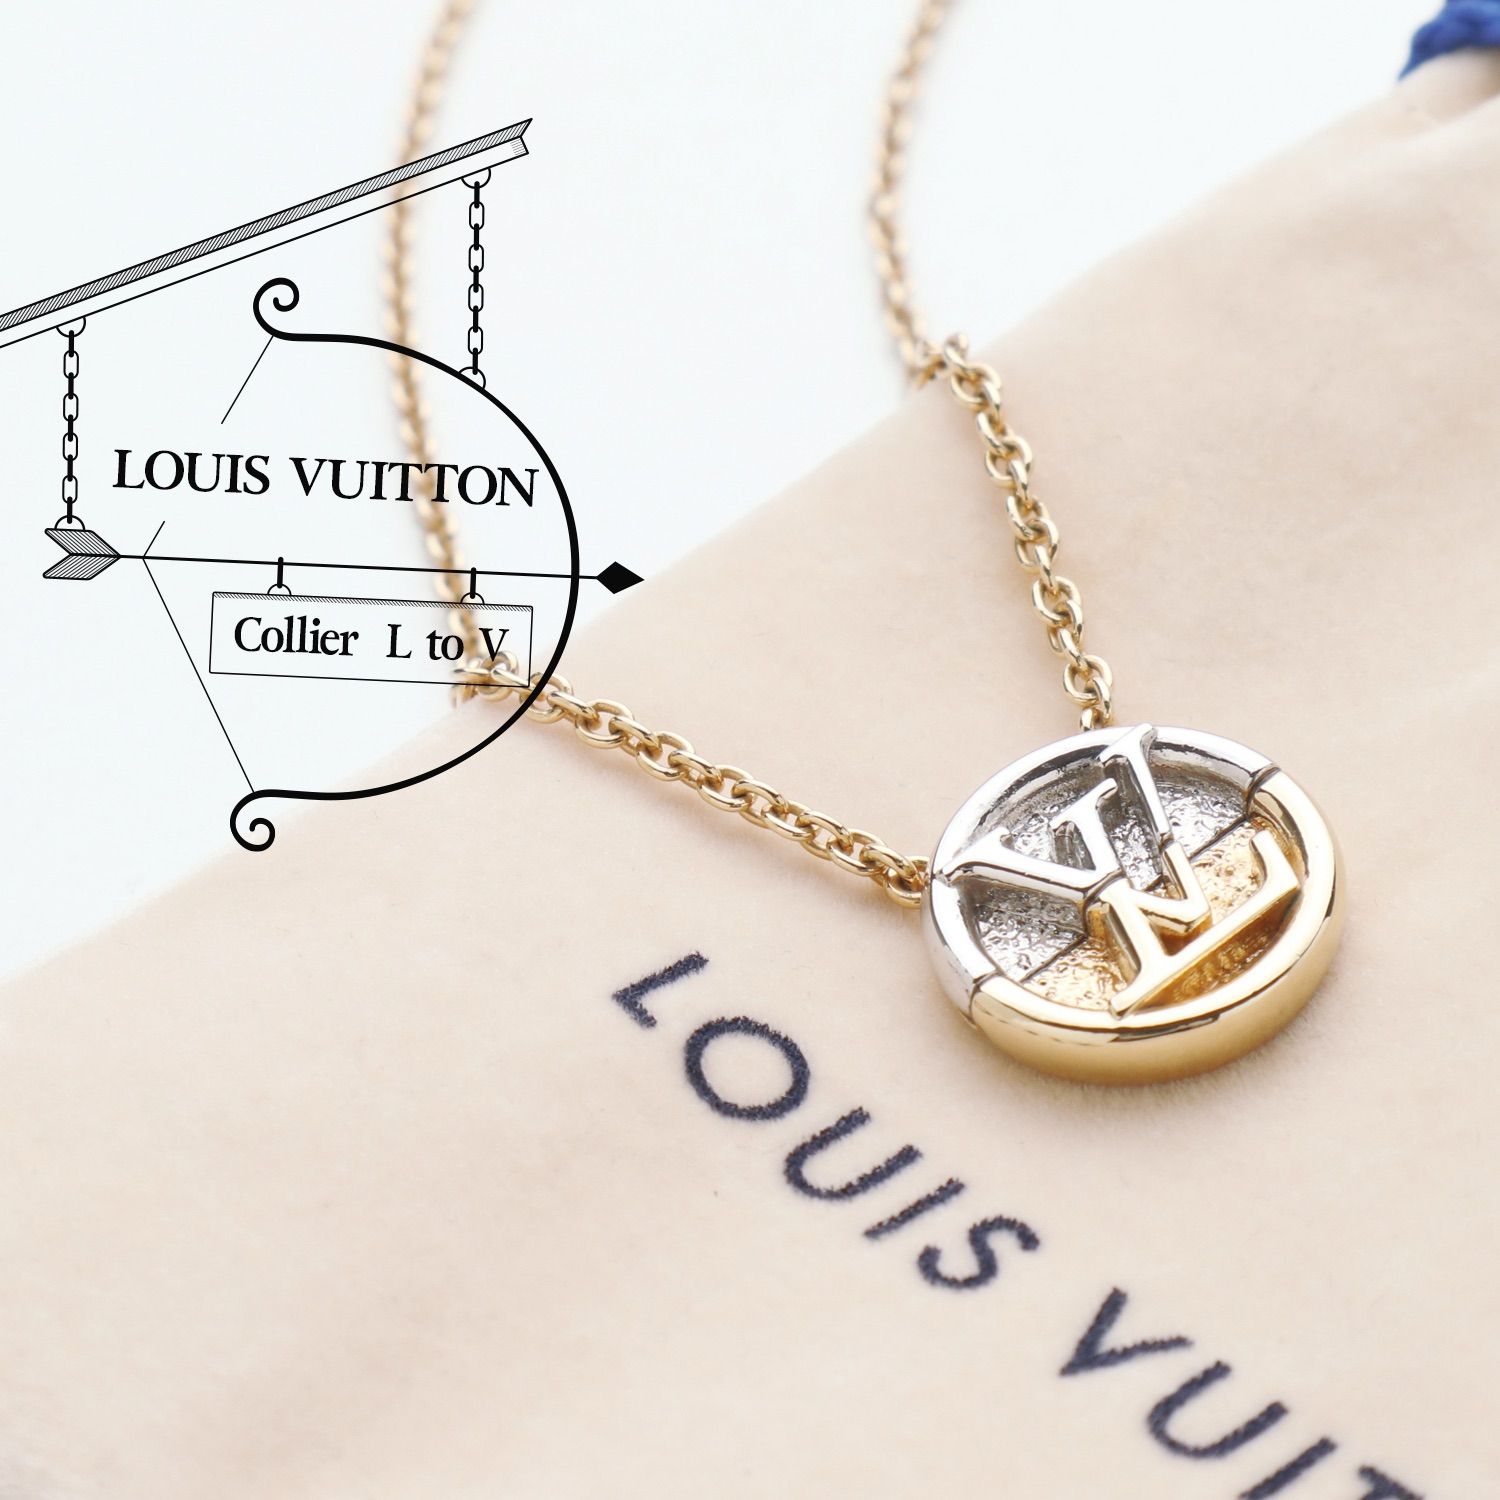 Louis vuitton ルイヴィトン ネックレス コリエ アーク シティー